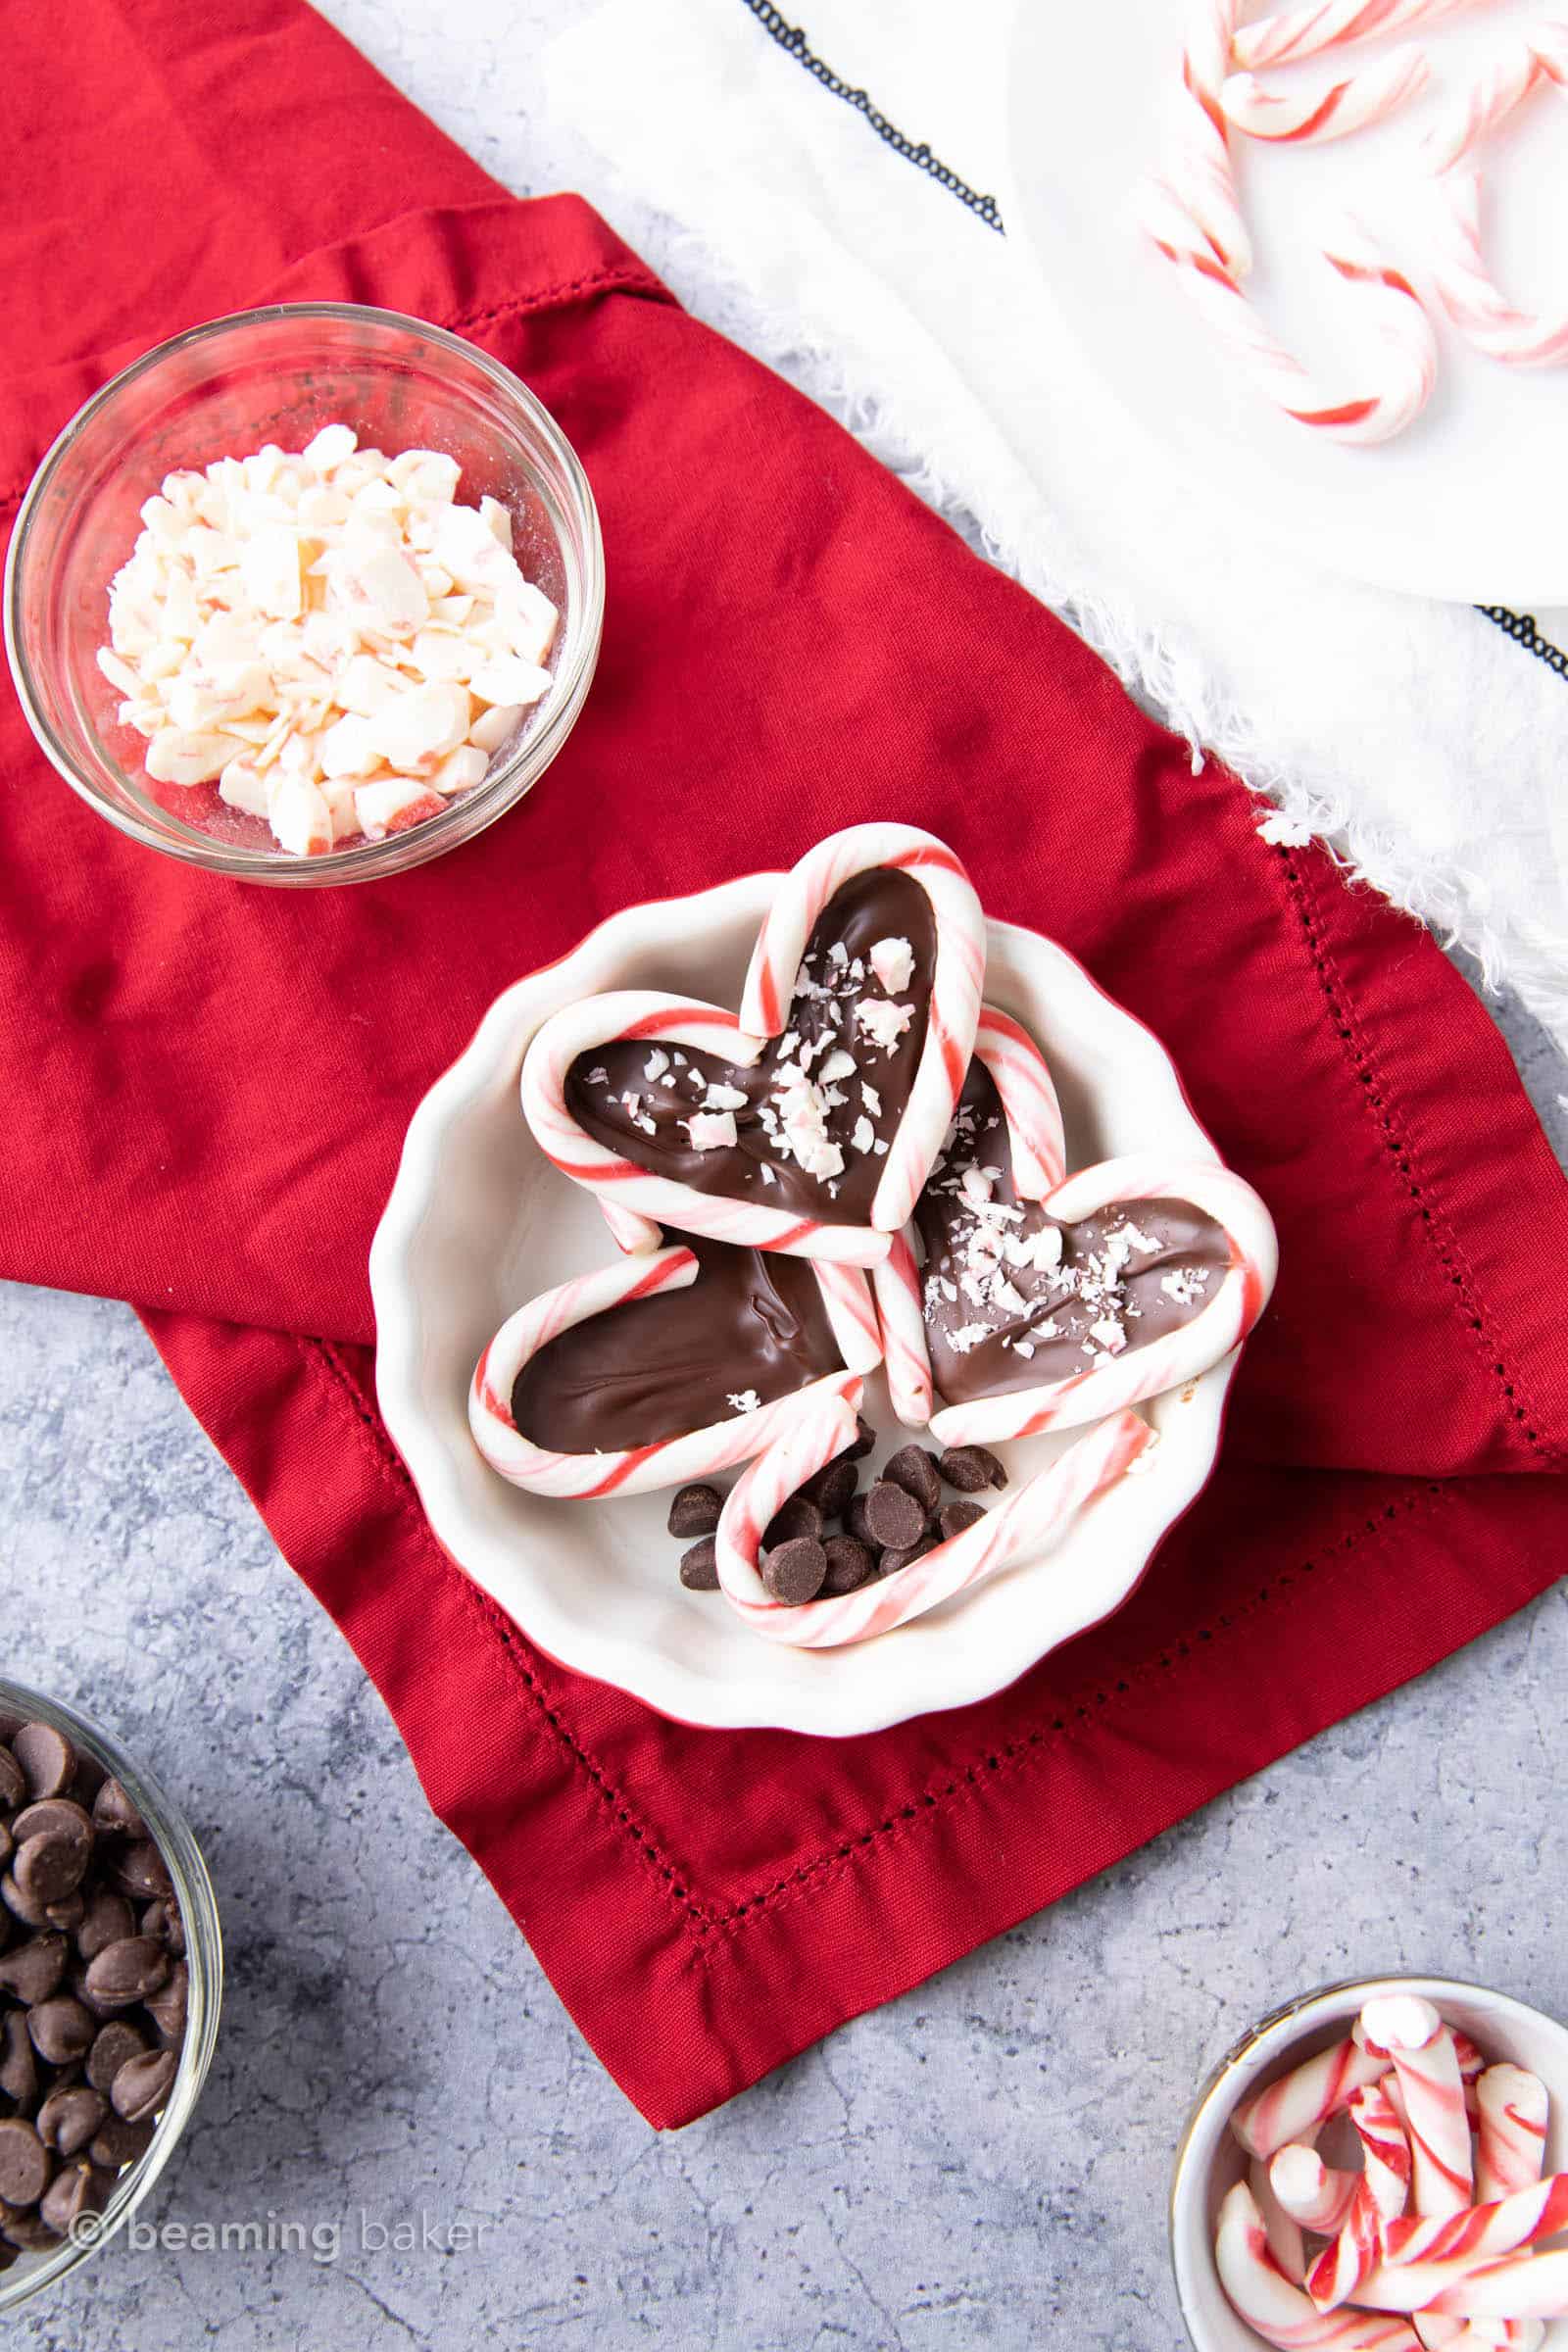 Overhead shot of table with finished candy cane hearts in a bowl, crushed candy canes and chocolate chips in a bowl